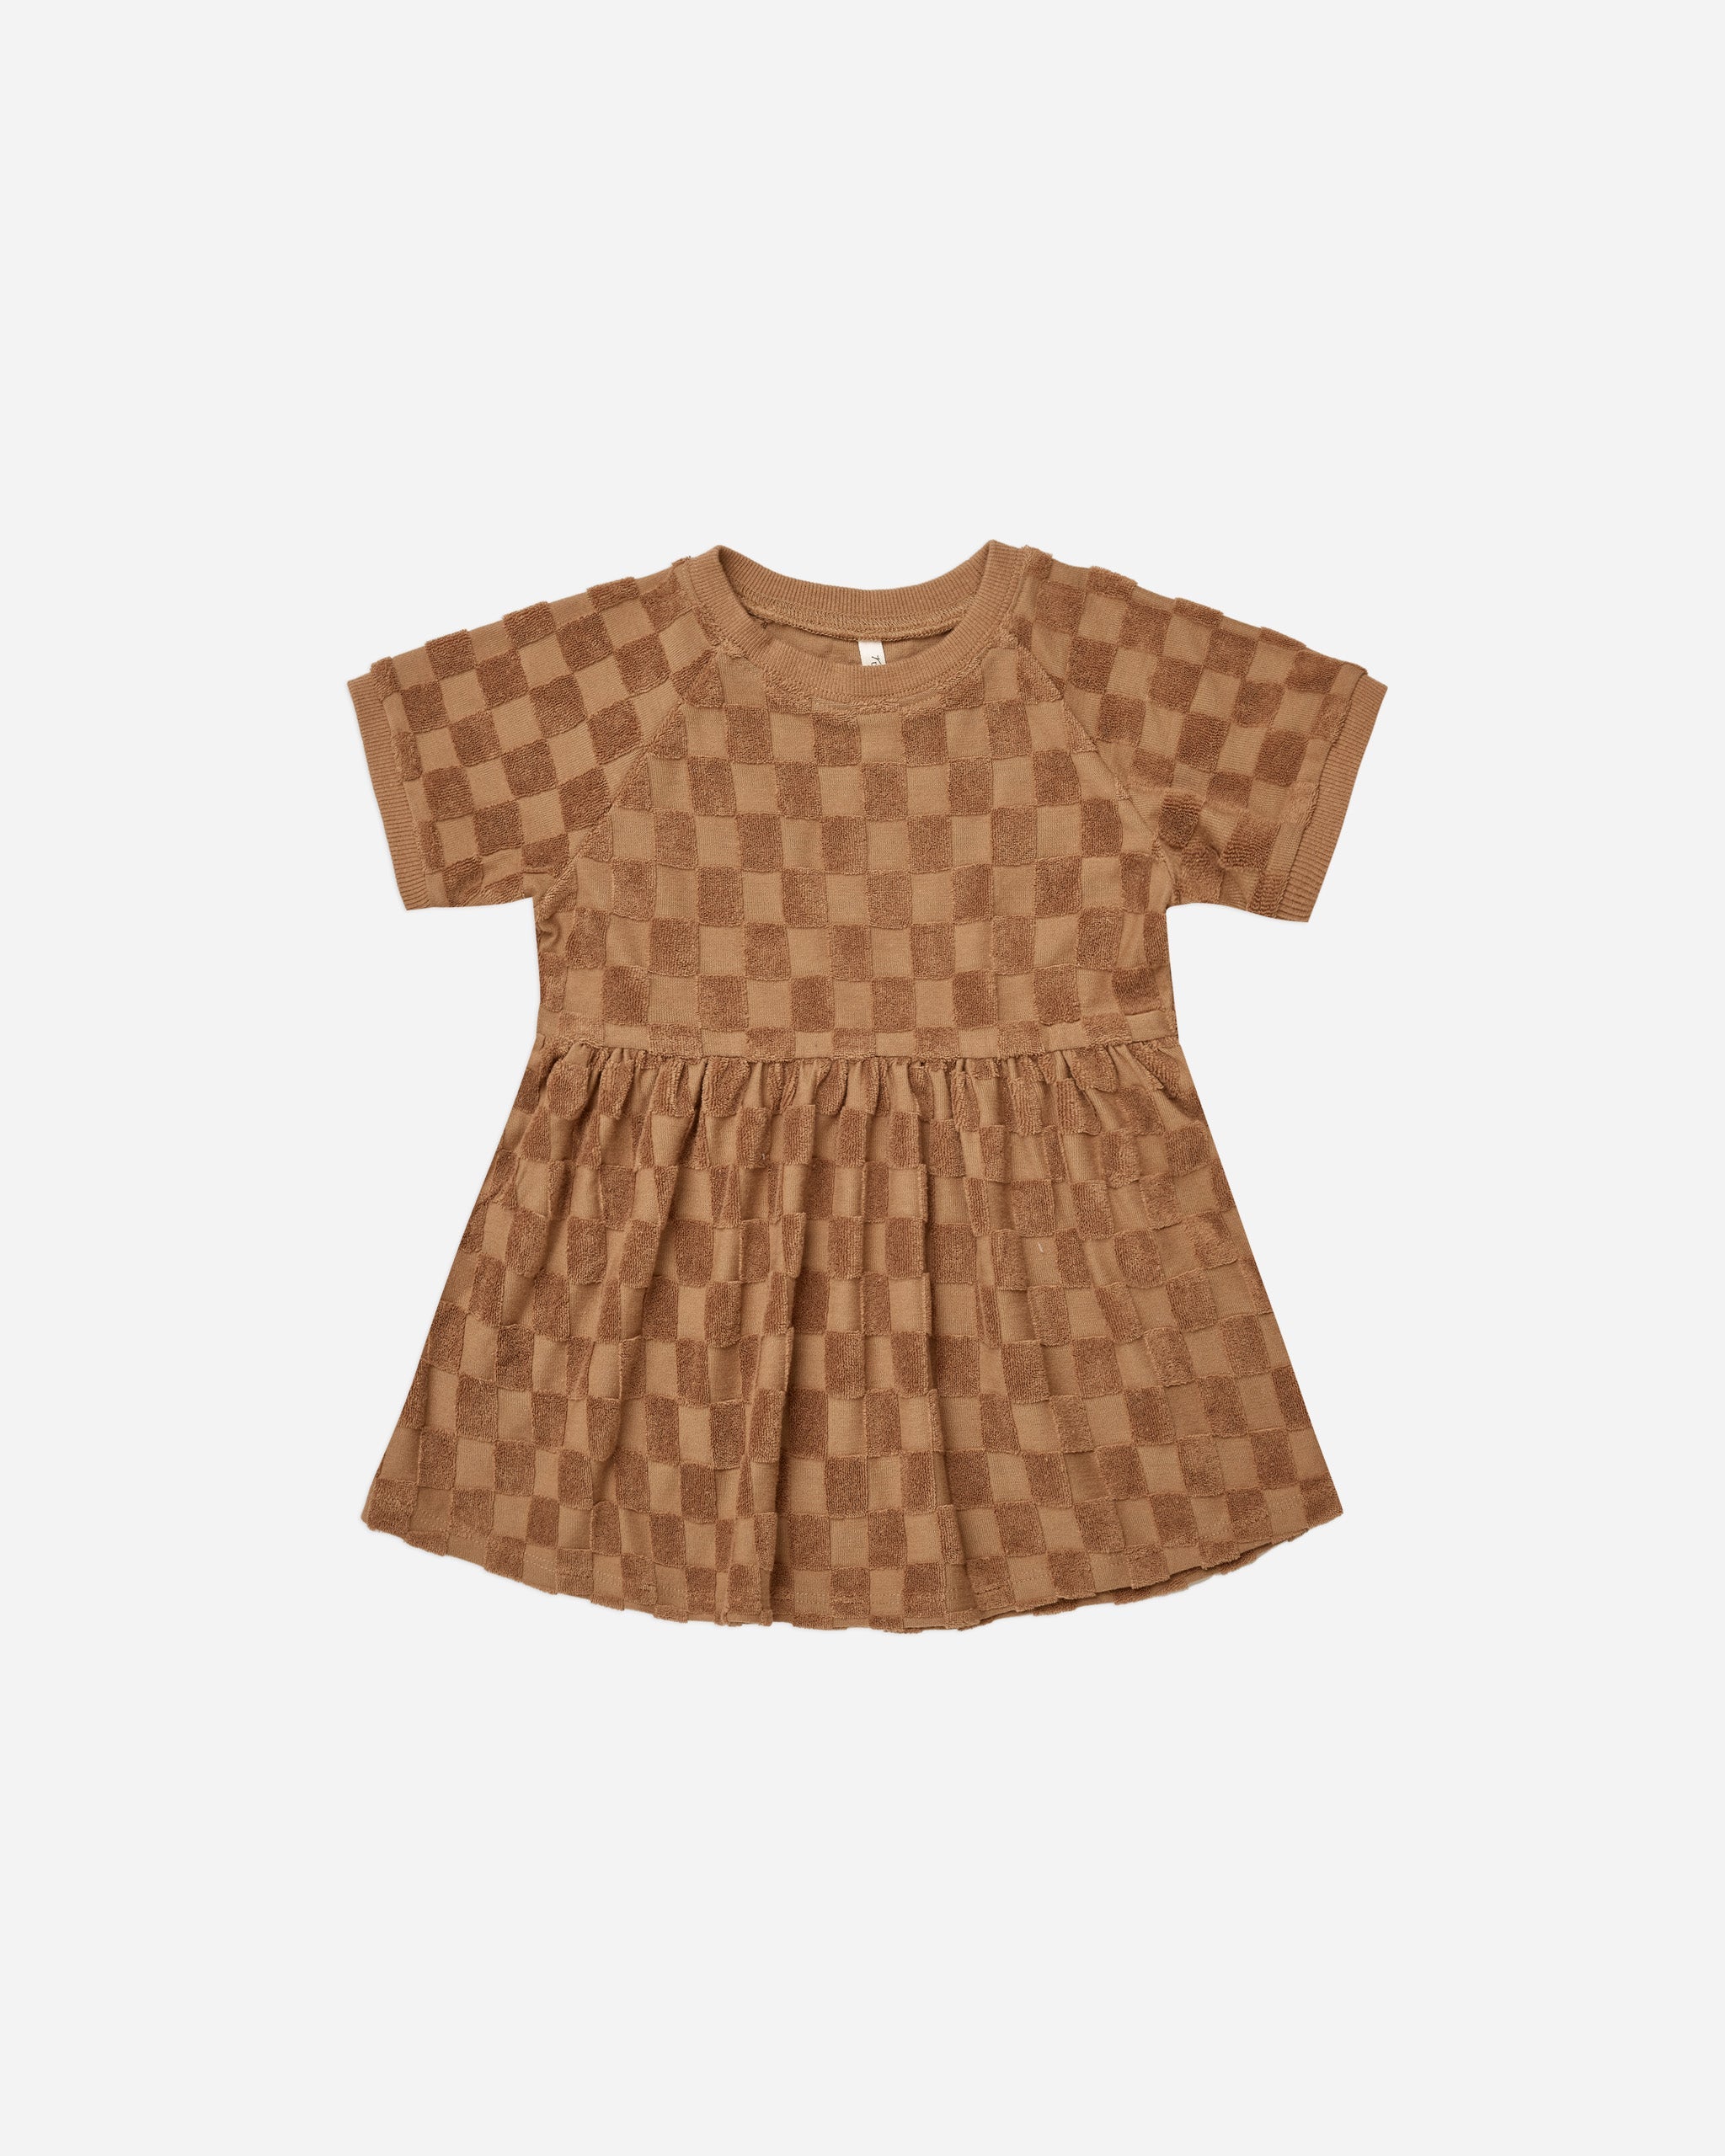 raglan dress || camel check - Rylee + Cru | Kids Clothes | Trendy Baby Clothes | Modern Infant Outfits |